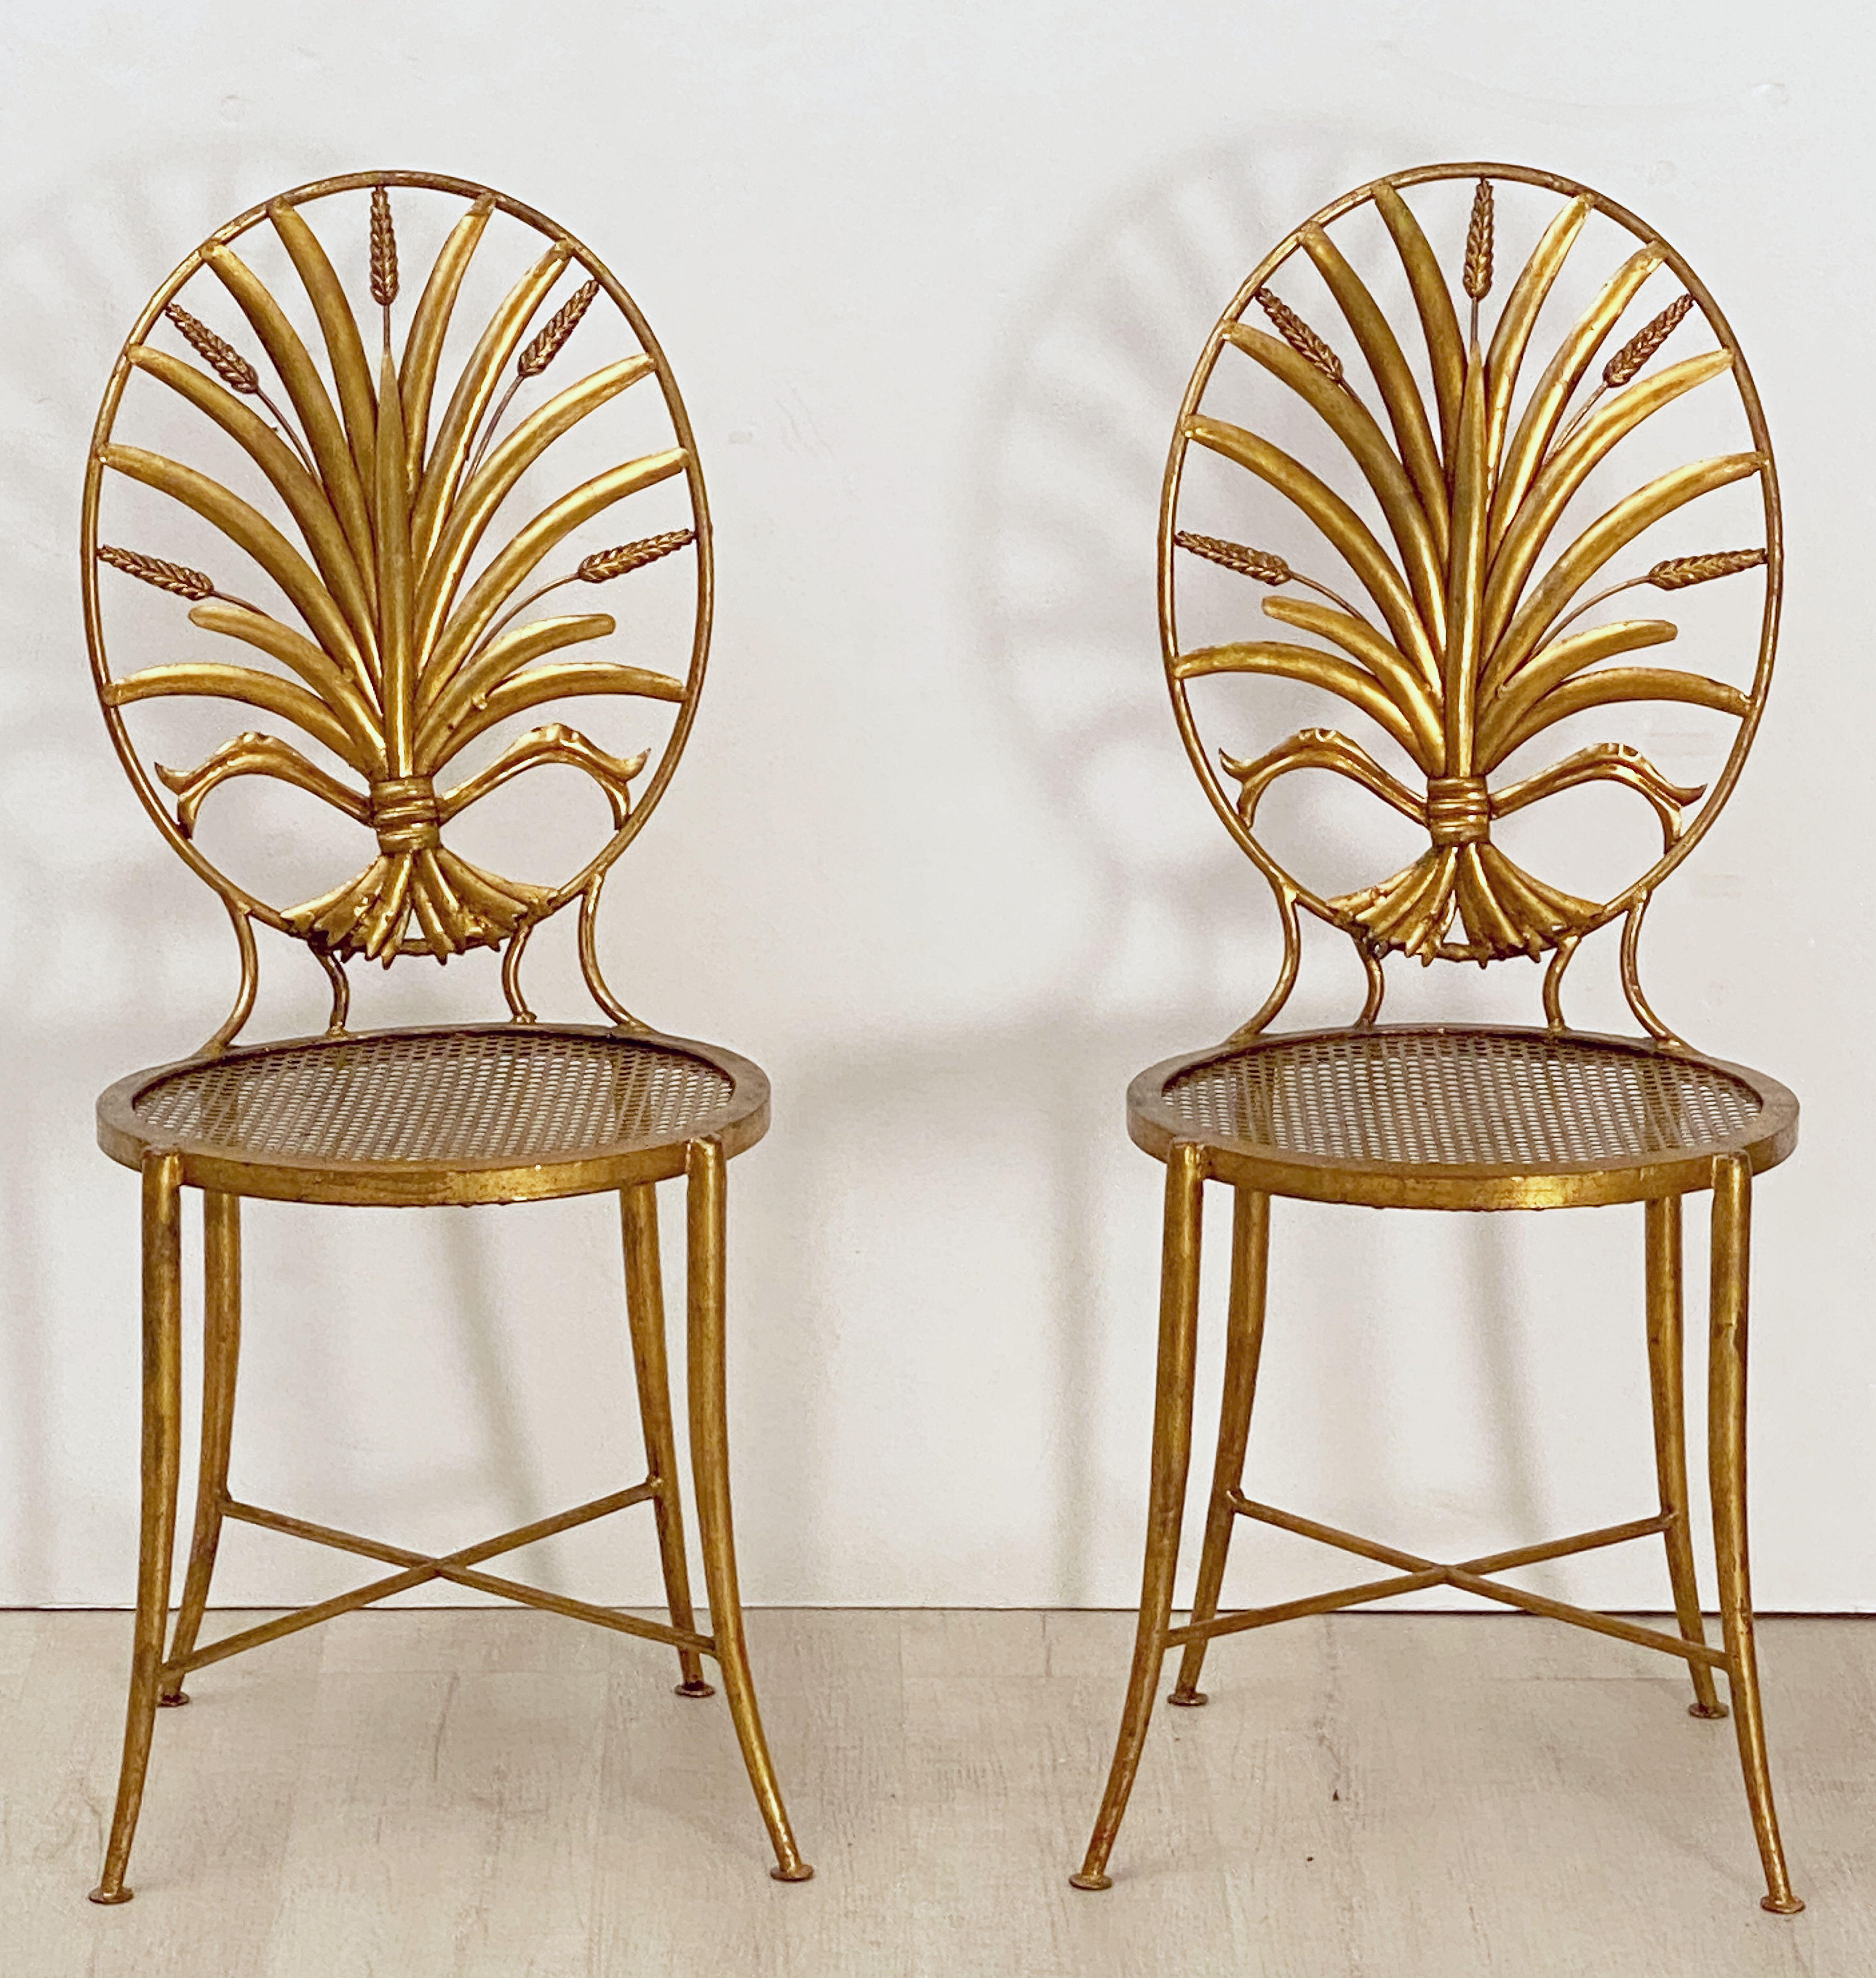 Italian Wheat Sheaf Cocktail Table and Chairs Set by S. Salvadori, Firenze 2